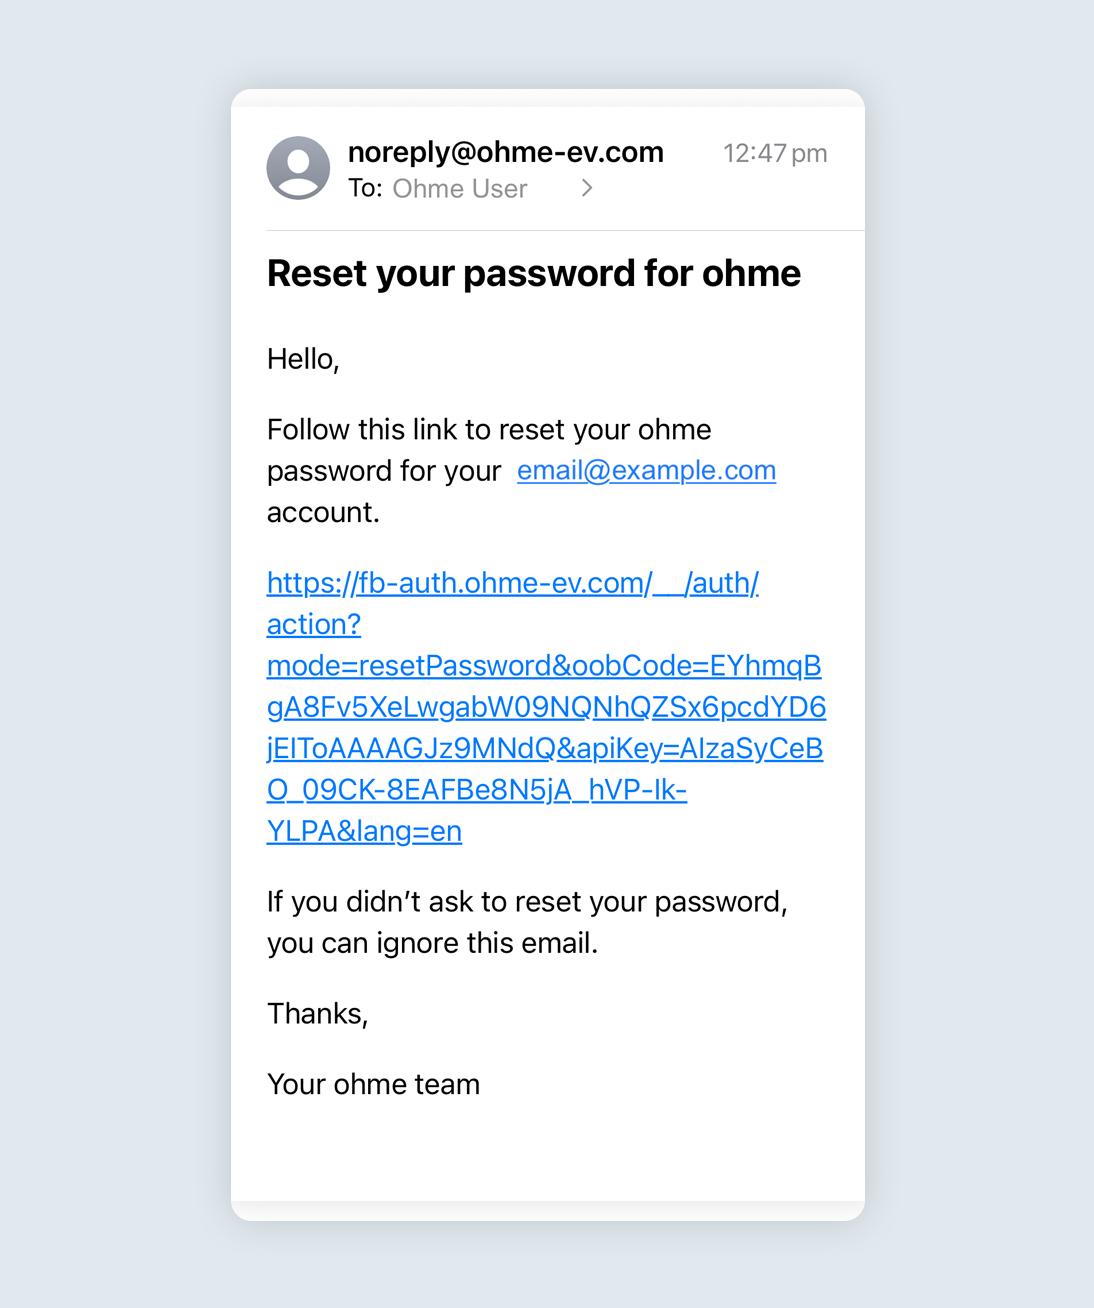 Password reset email from Ohme